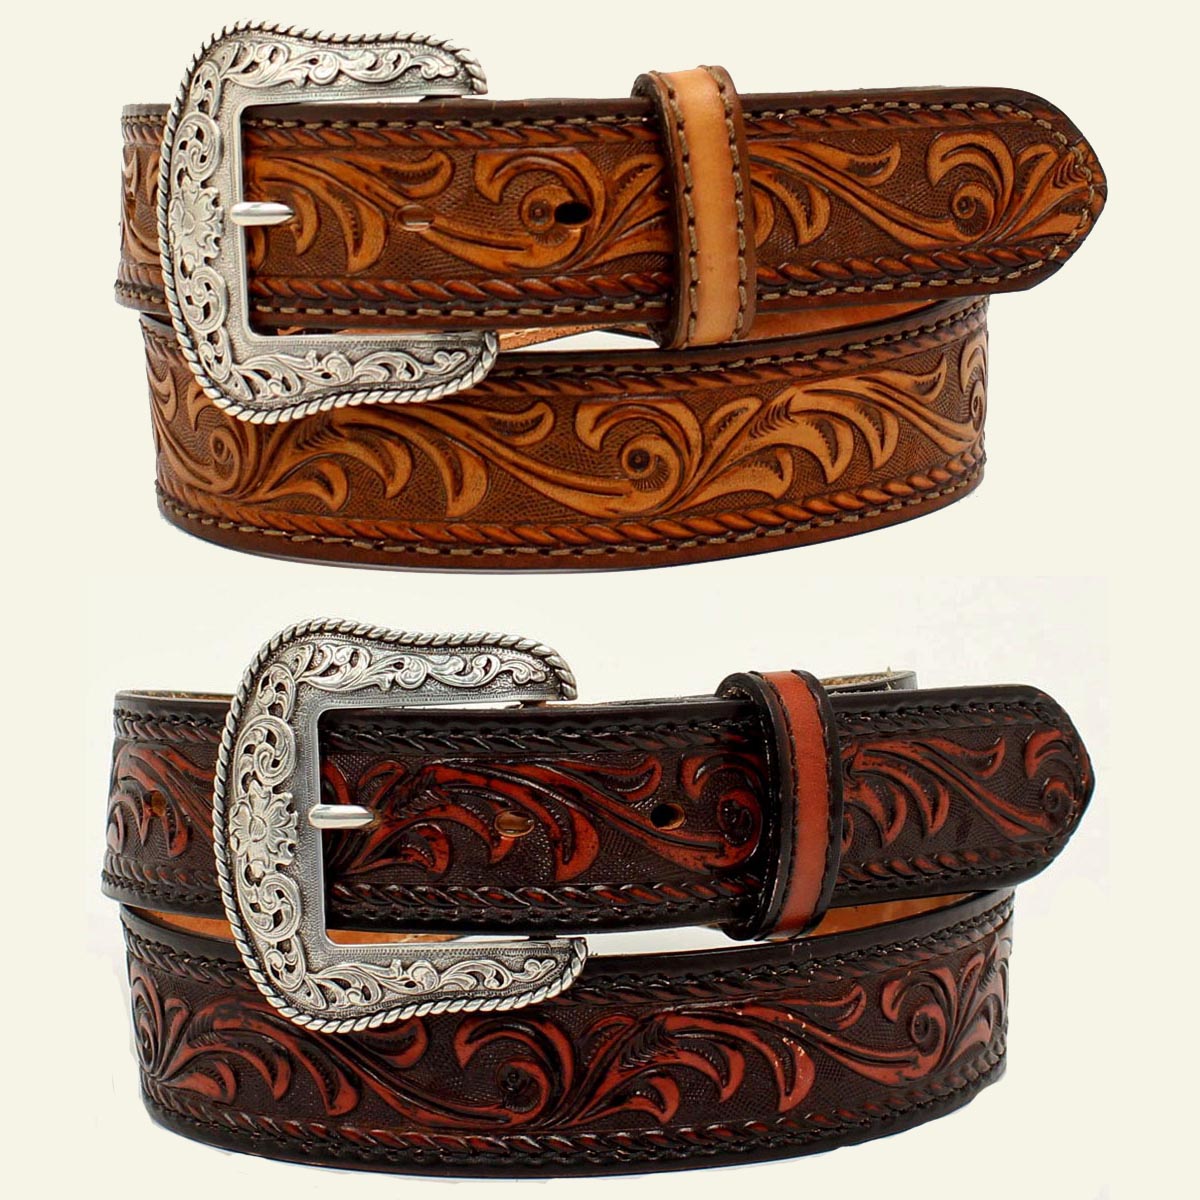 TOOLED WESTERN BELT MADE IN USA